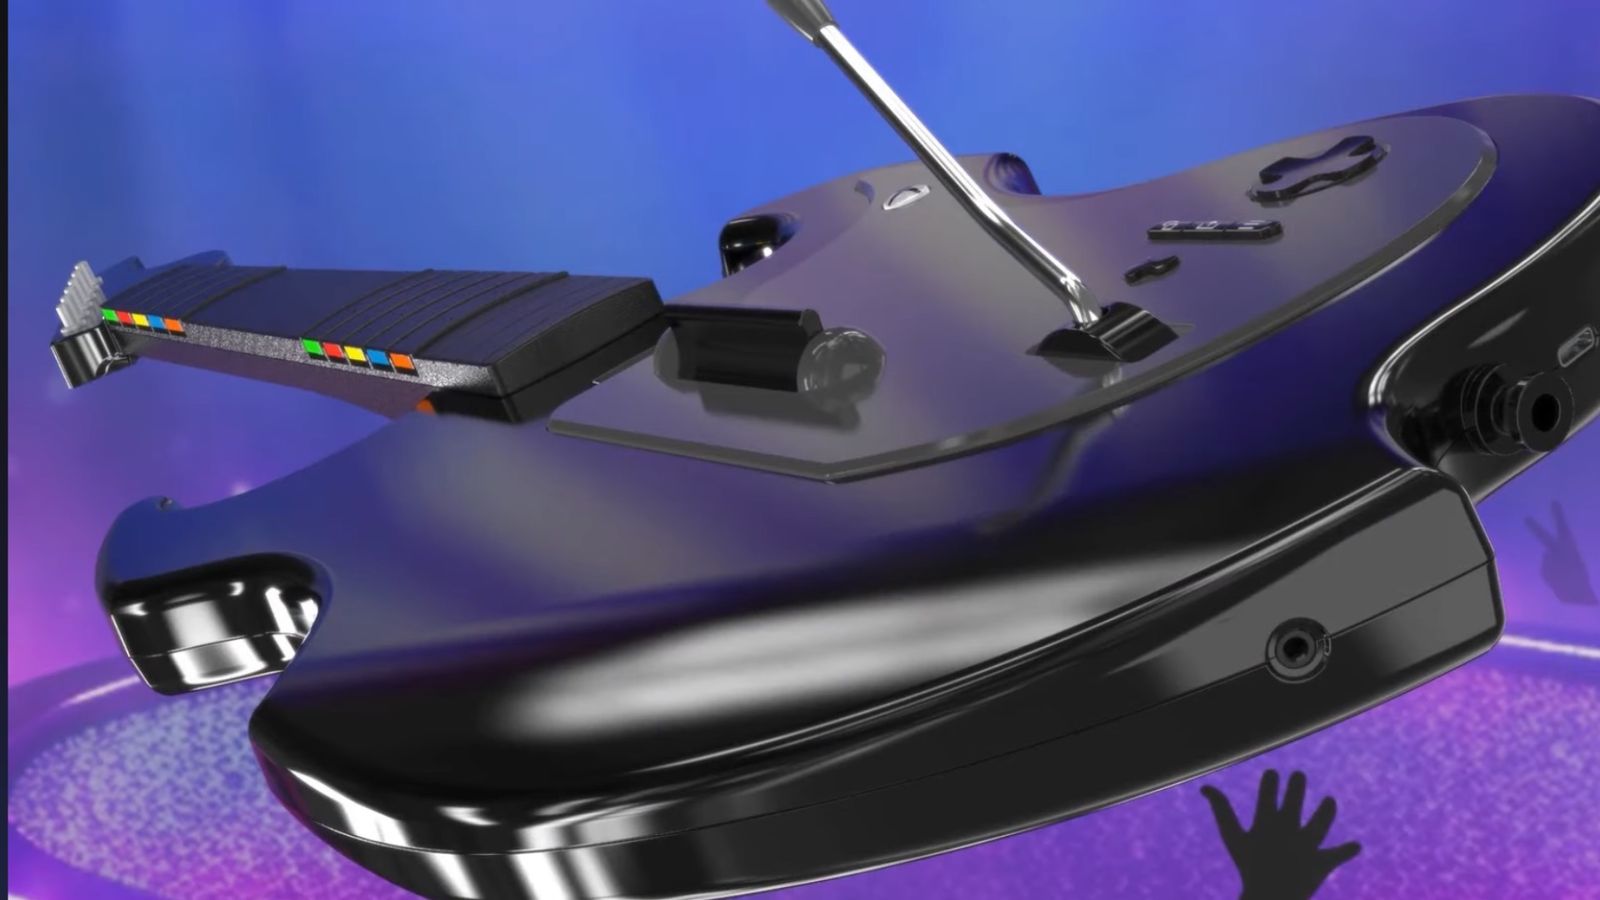 An image of the PDP Riffmaster guitar controller on a purple rock background